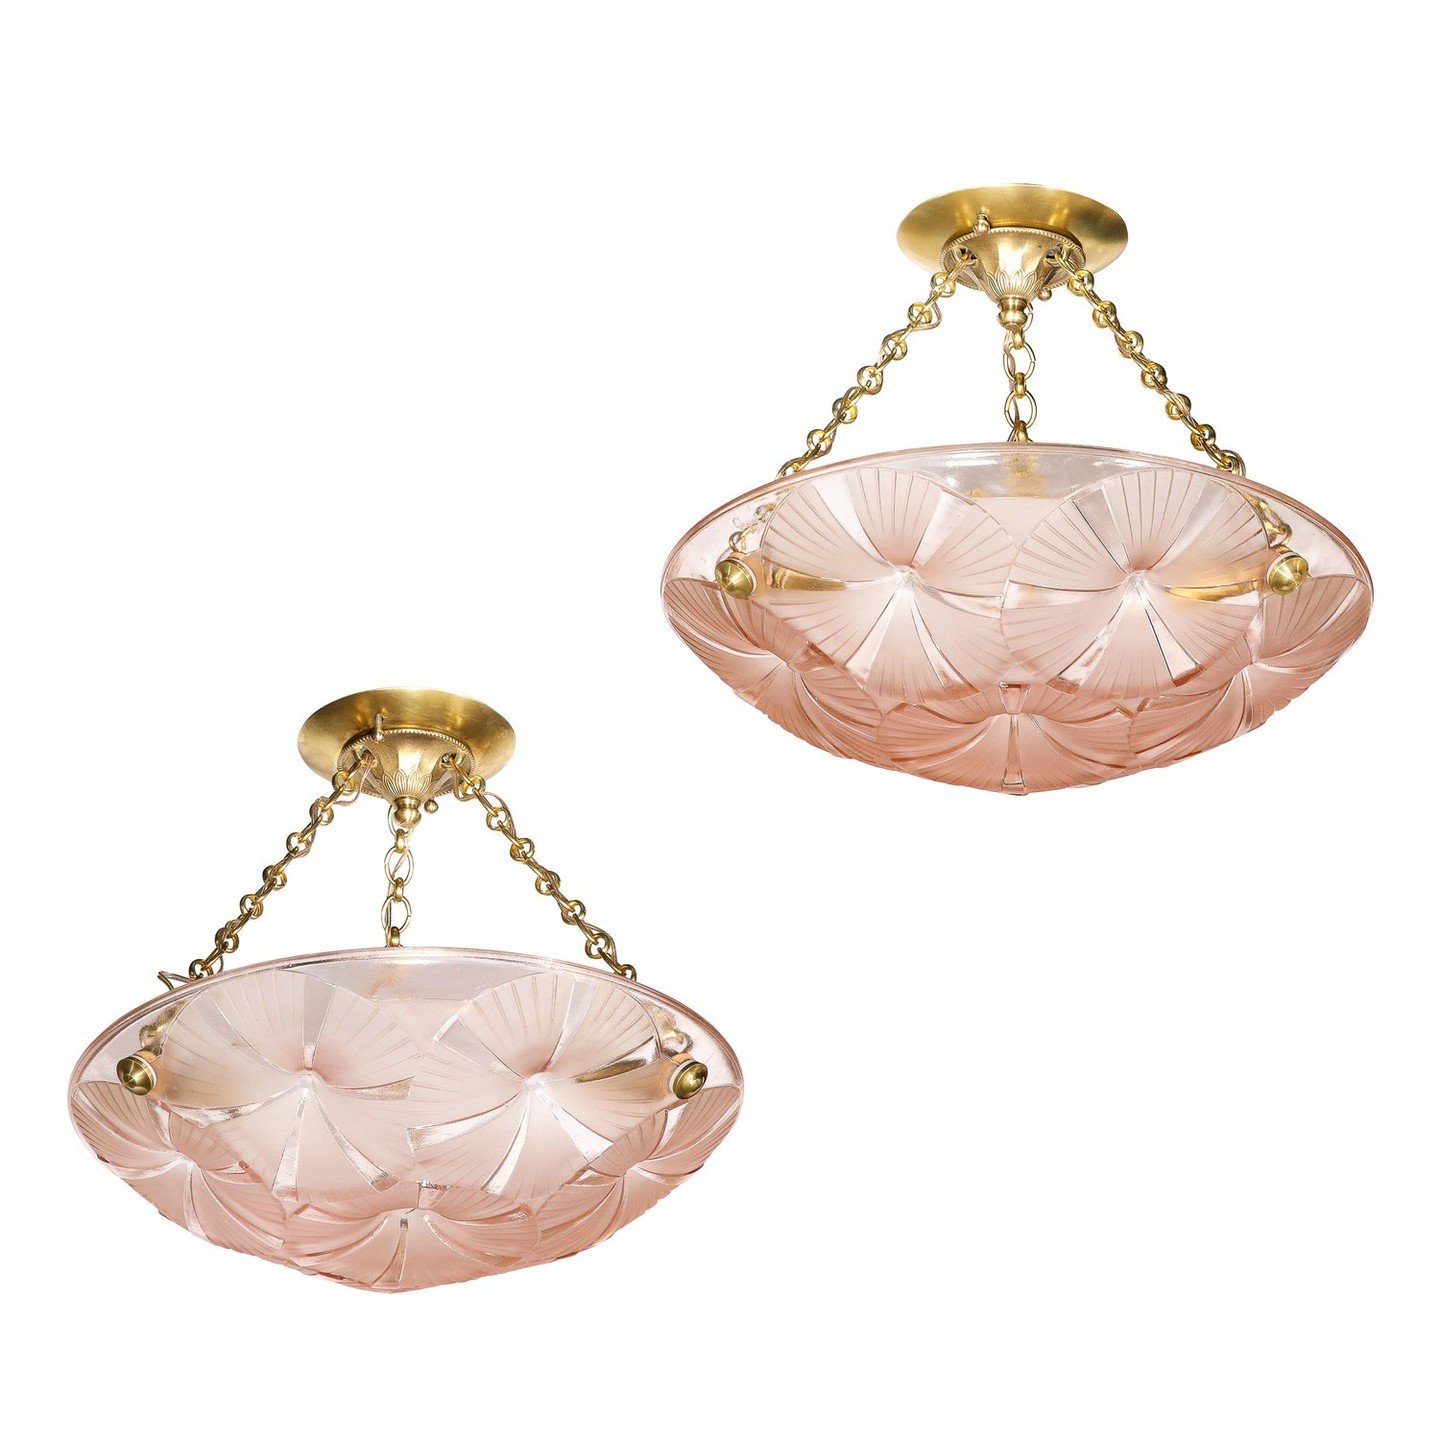 Pair of Art Deco Pendant Chandeliers in Molded &amp; Frosted Rose Glass signed Degue

This alluring and materially exquisite Pair of Art Deco Pendant Chandeliers in Molded &amp; Frosted Rose Glass are signed Degue and they originate from France, Circ